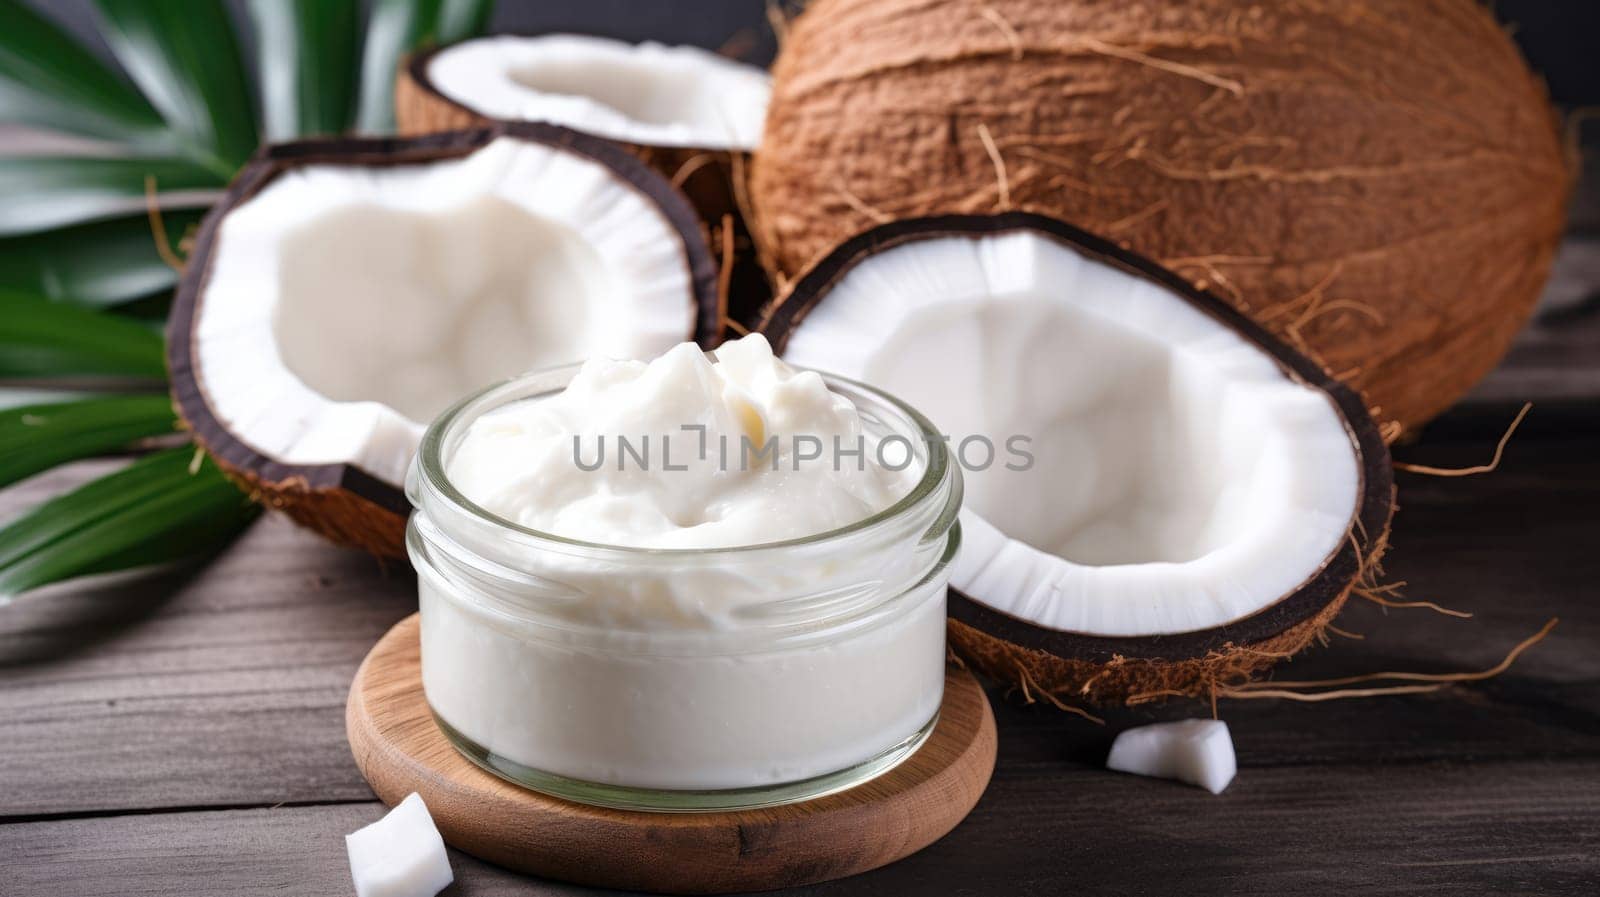 Coconut beauty skincare products. White cream with extract of Coconut. Mockup AI